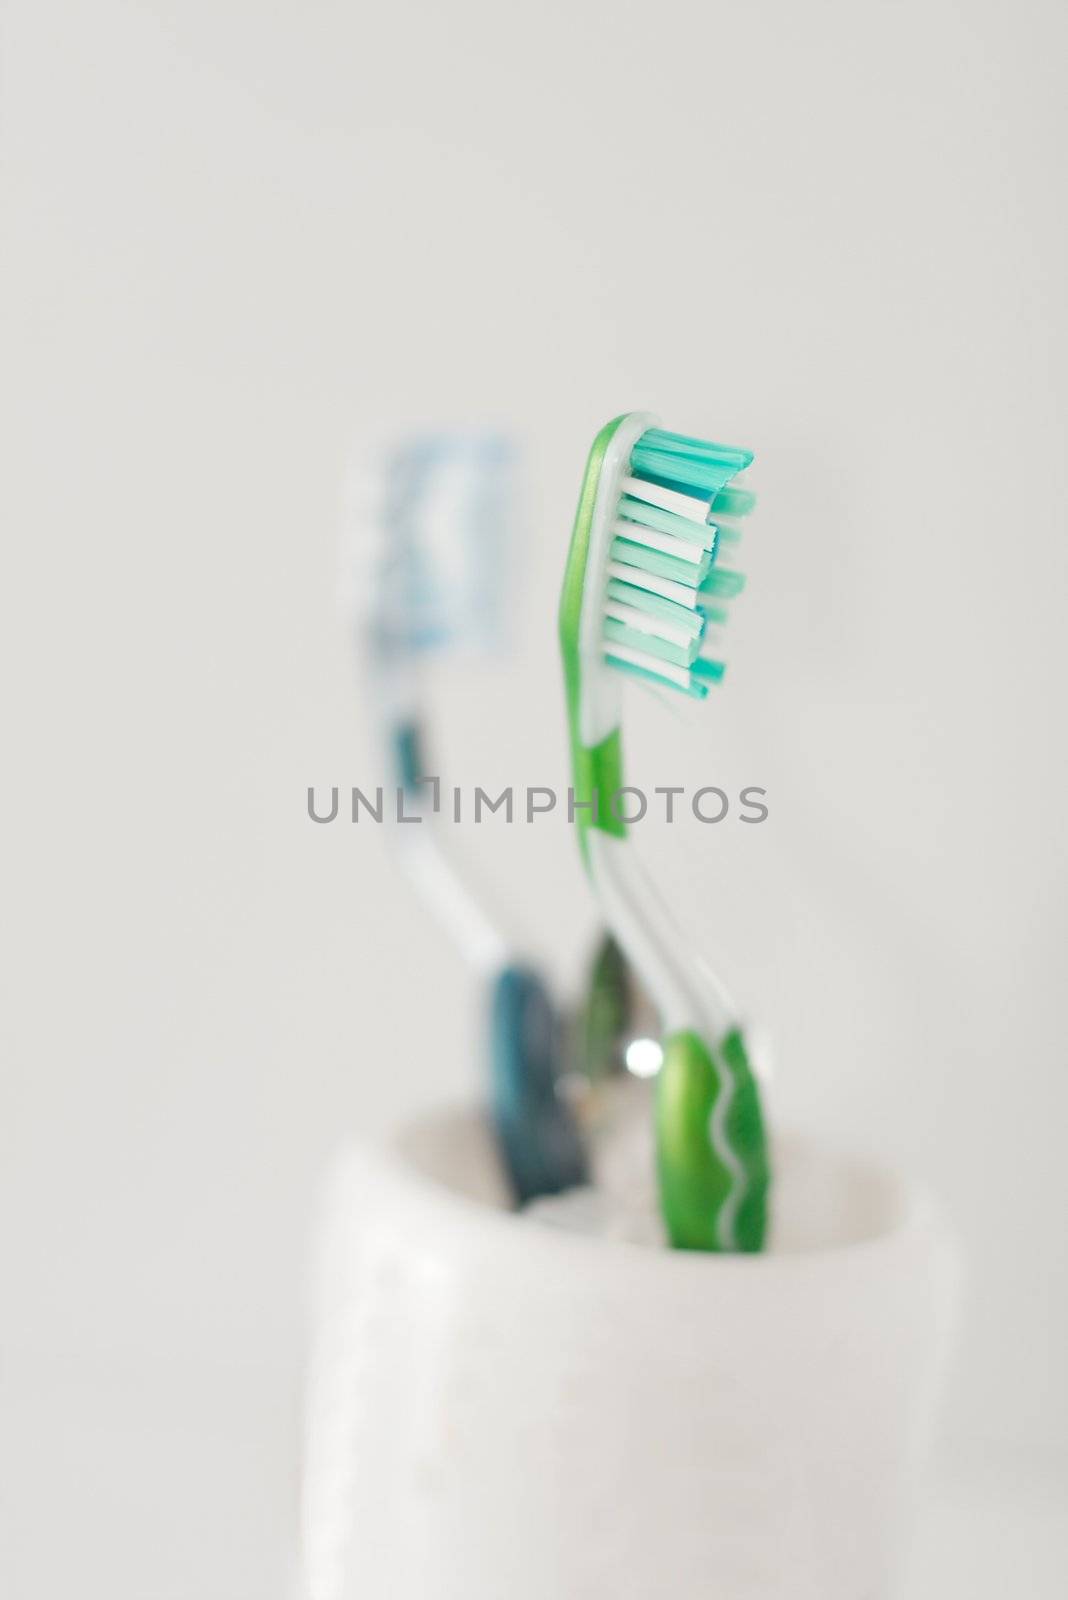 Tooth brushes in mug, one of them in focus